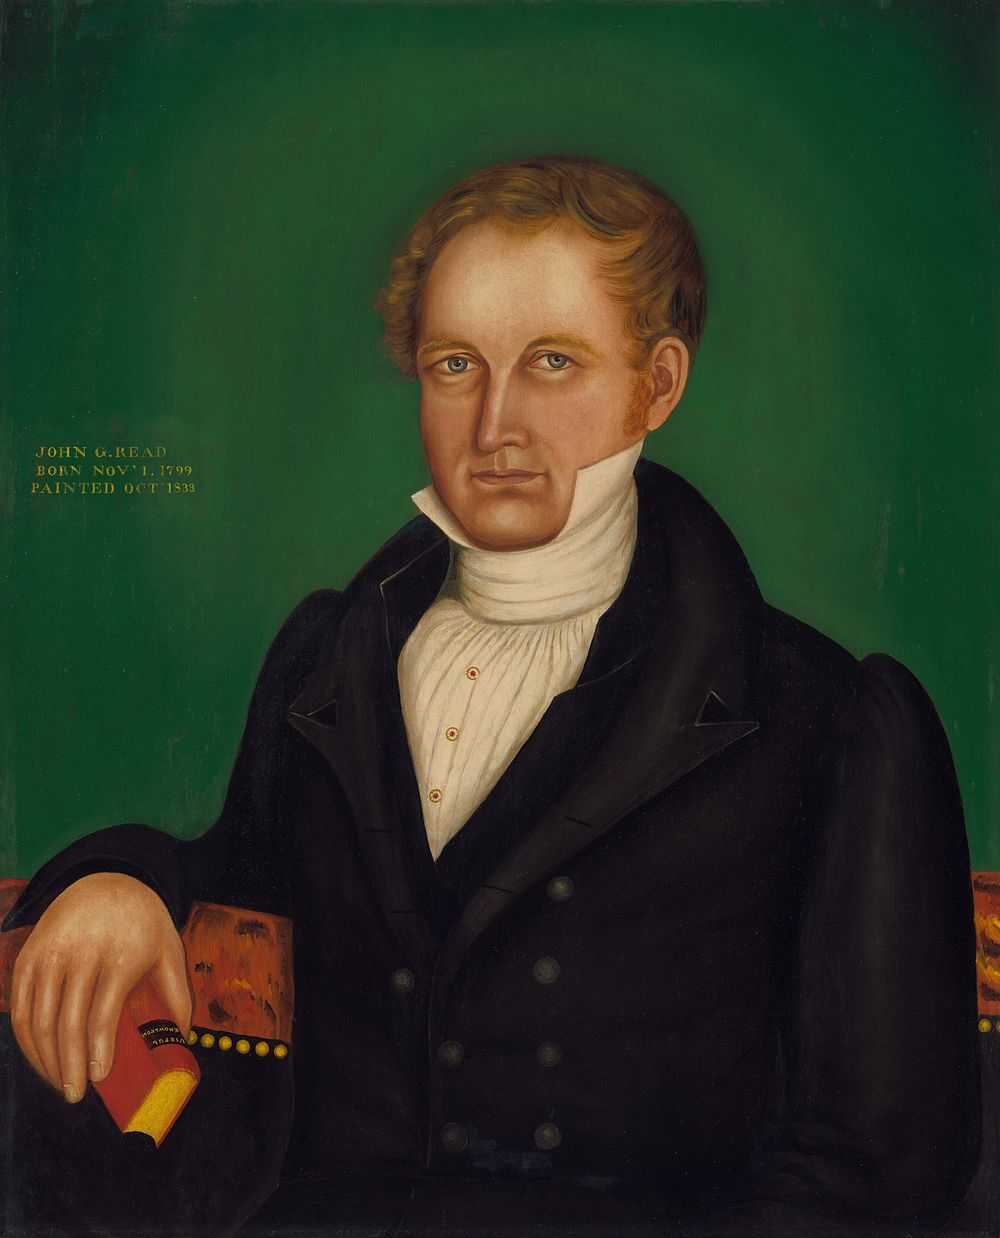 John G. Read (1833) by Royall Brewster Smith.  